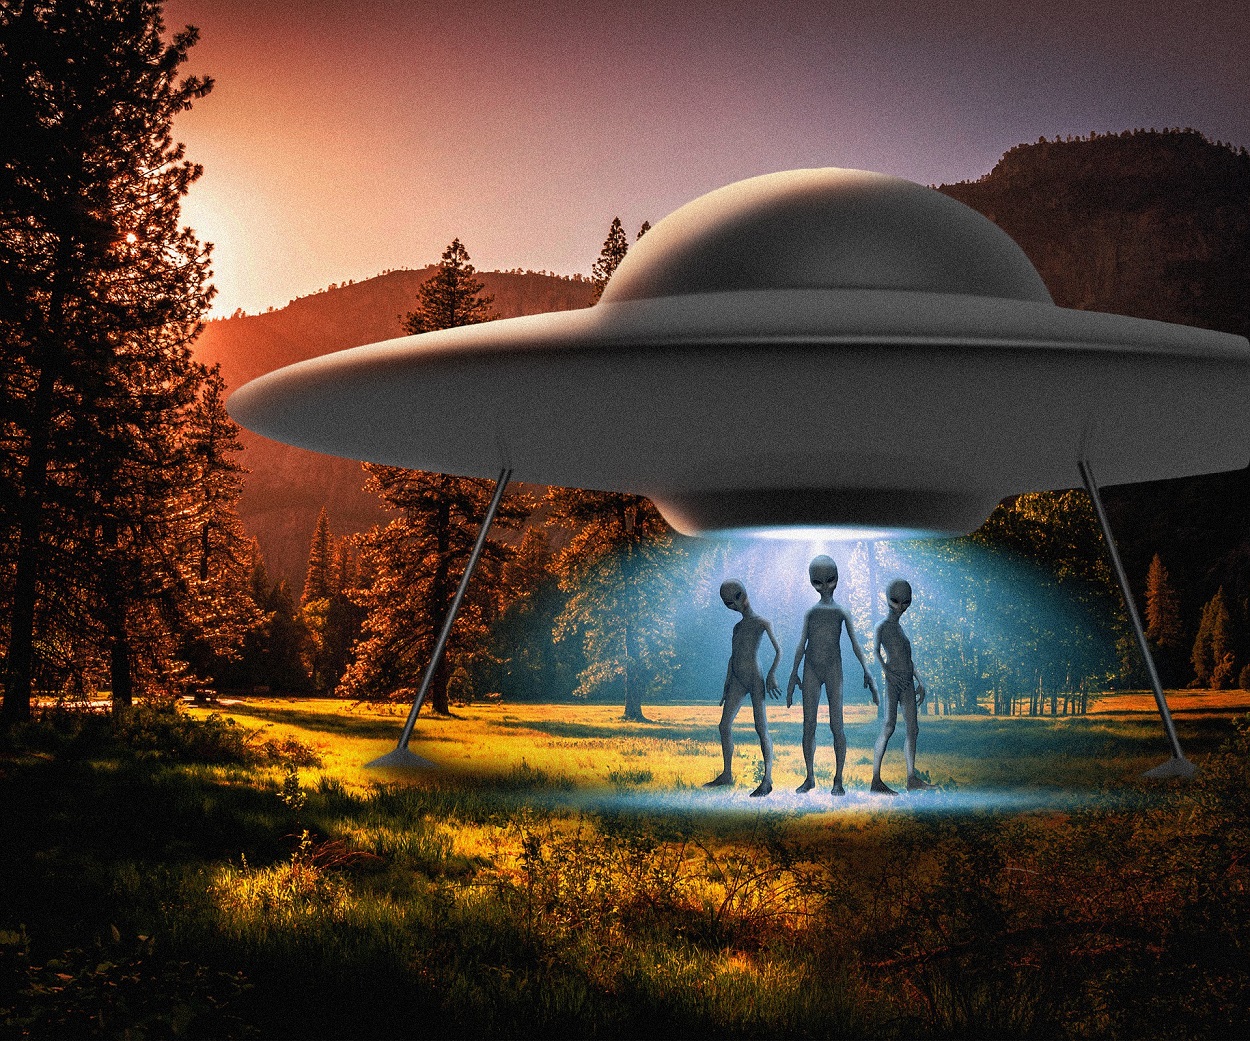 A depiction of aliens under a flying saucer